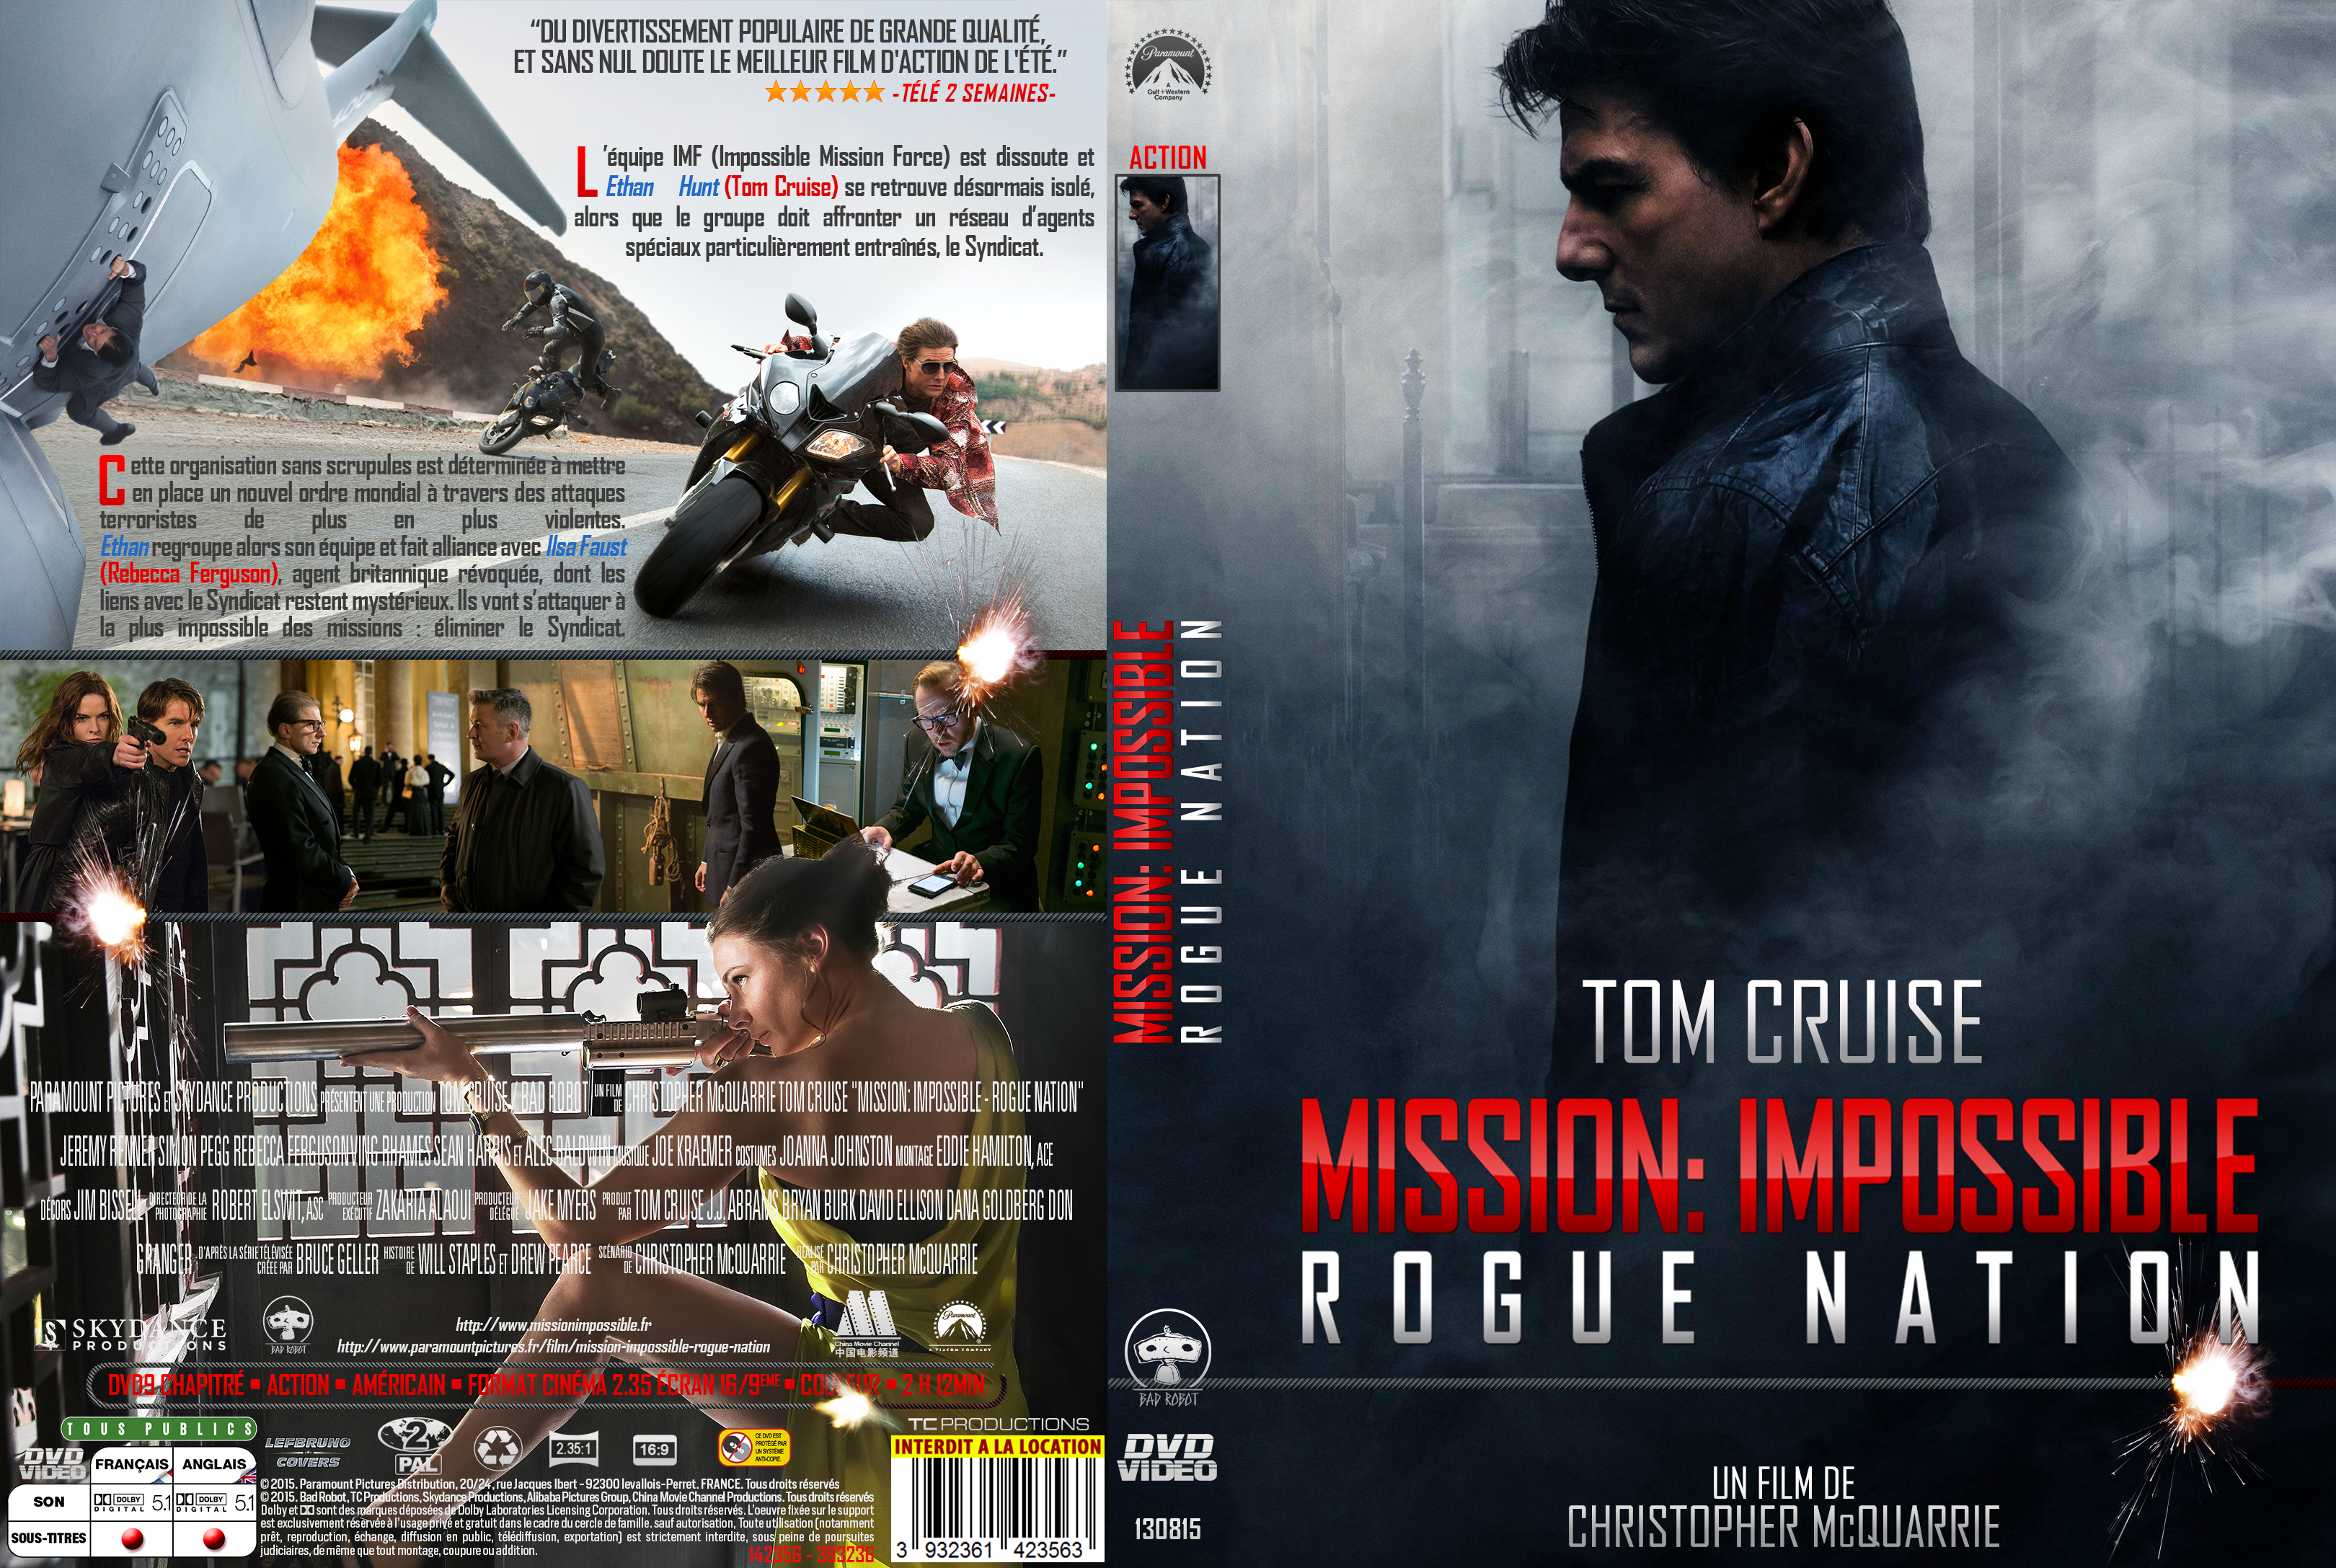 Jaquette DVD Mission : Impossible Rogue Nation custom